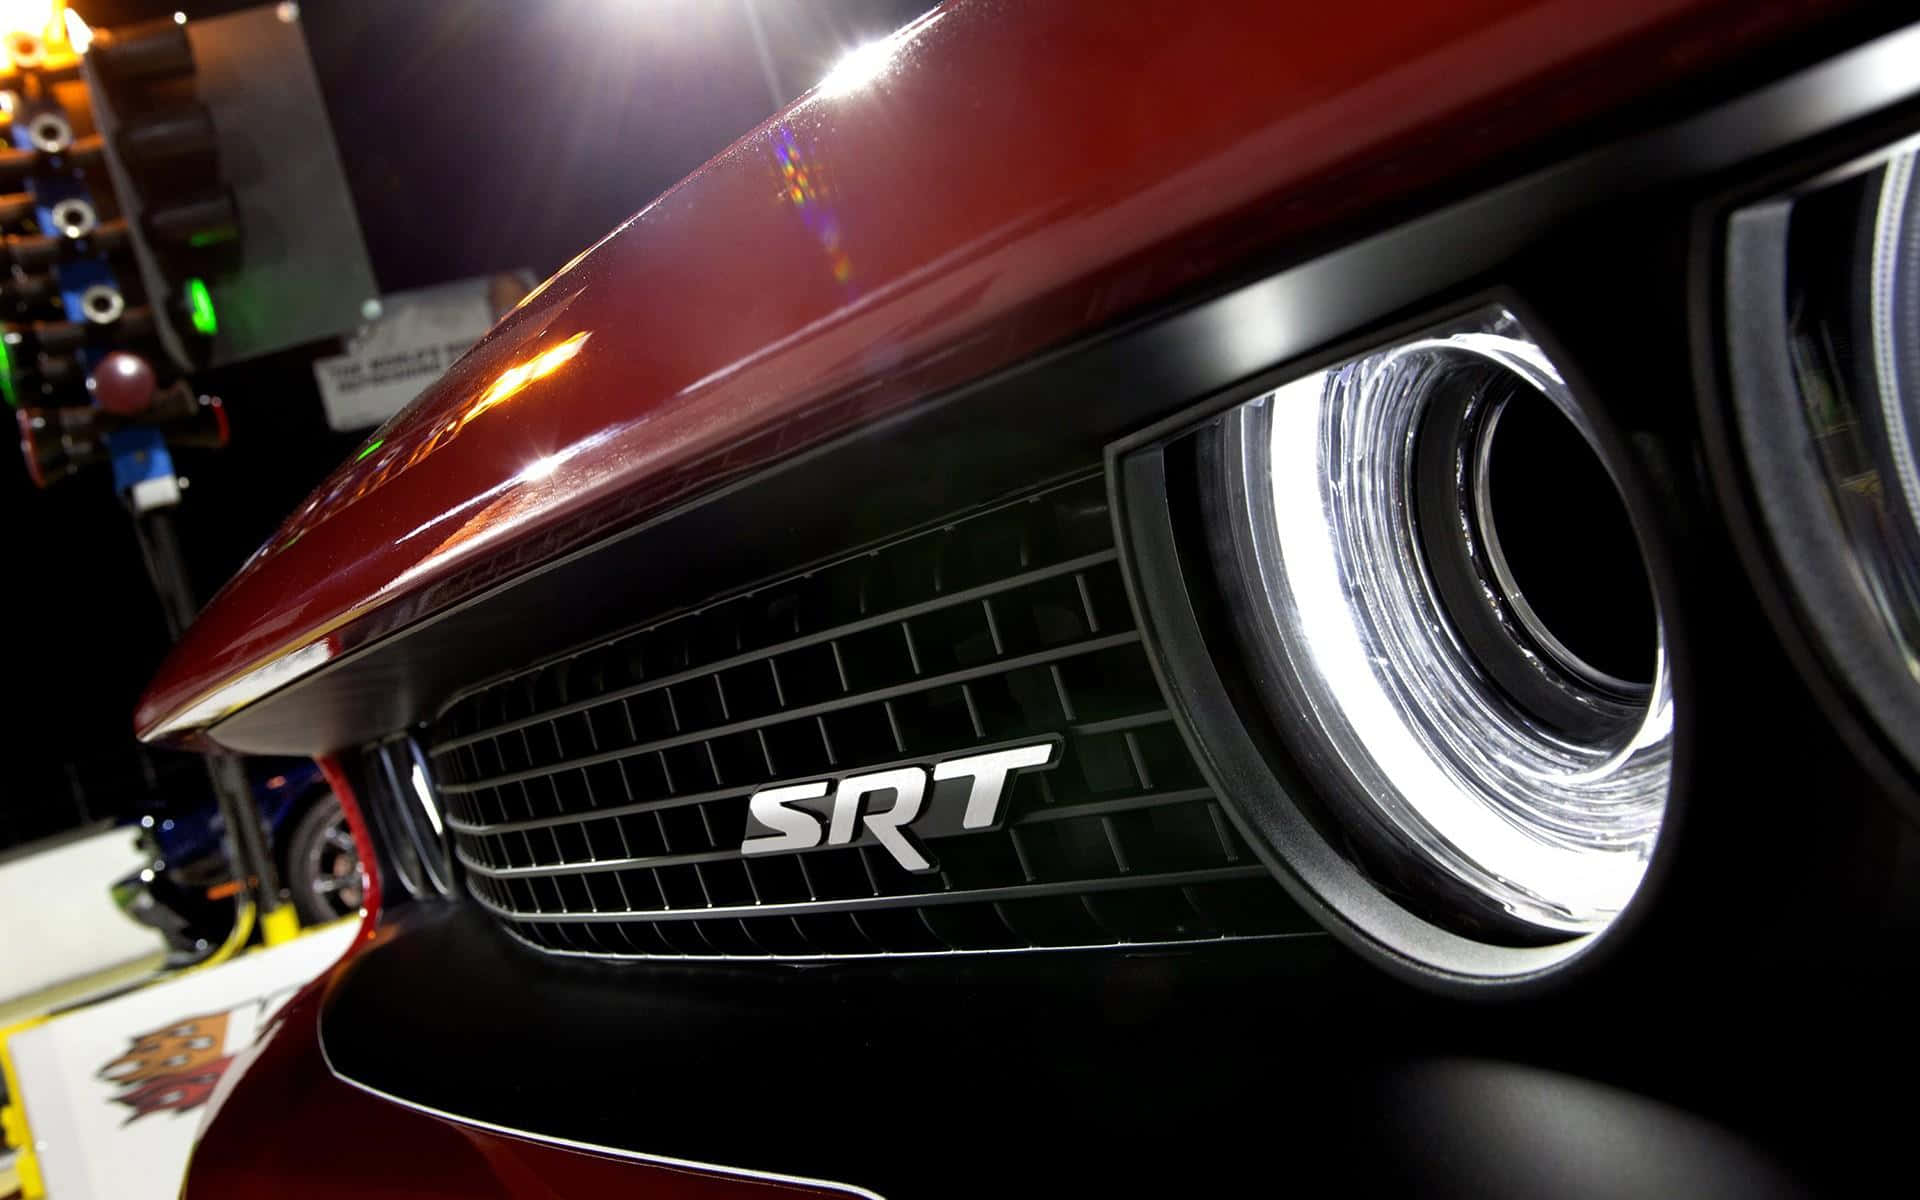 Red S R T Vehicle Grilleand Headlight Wallpaper